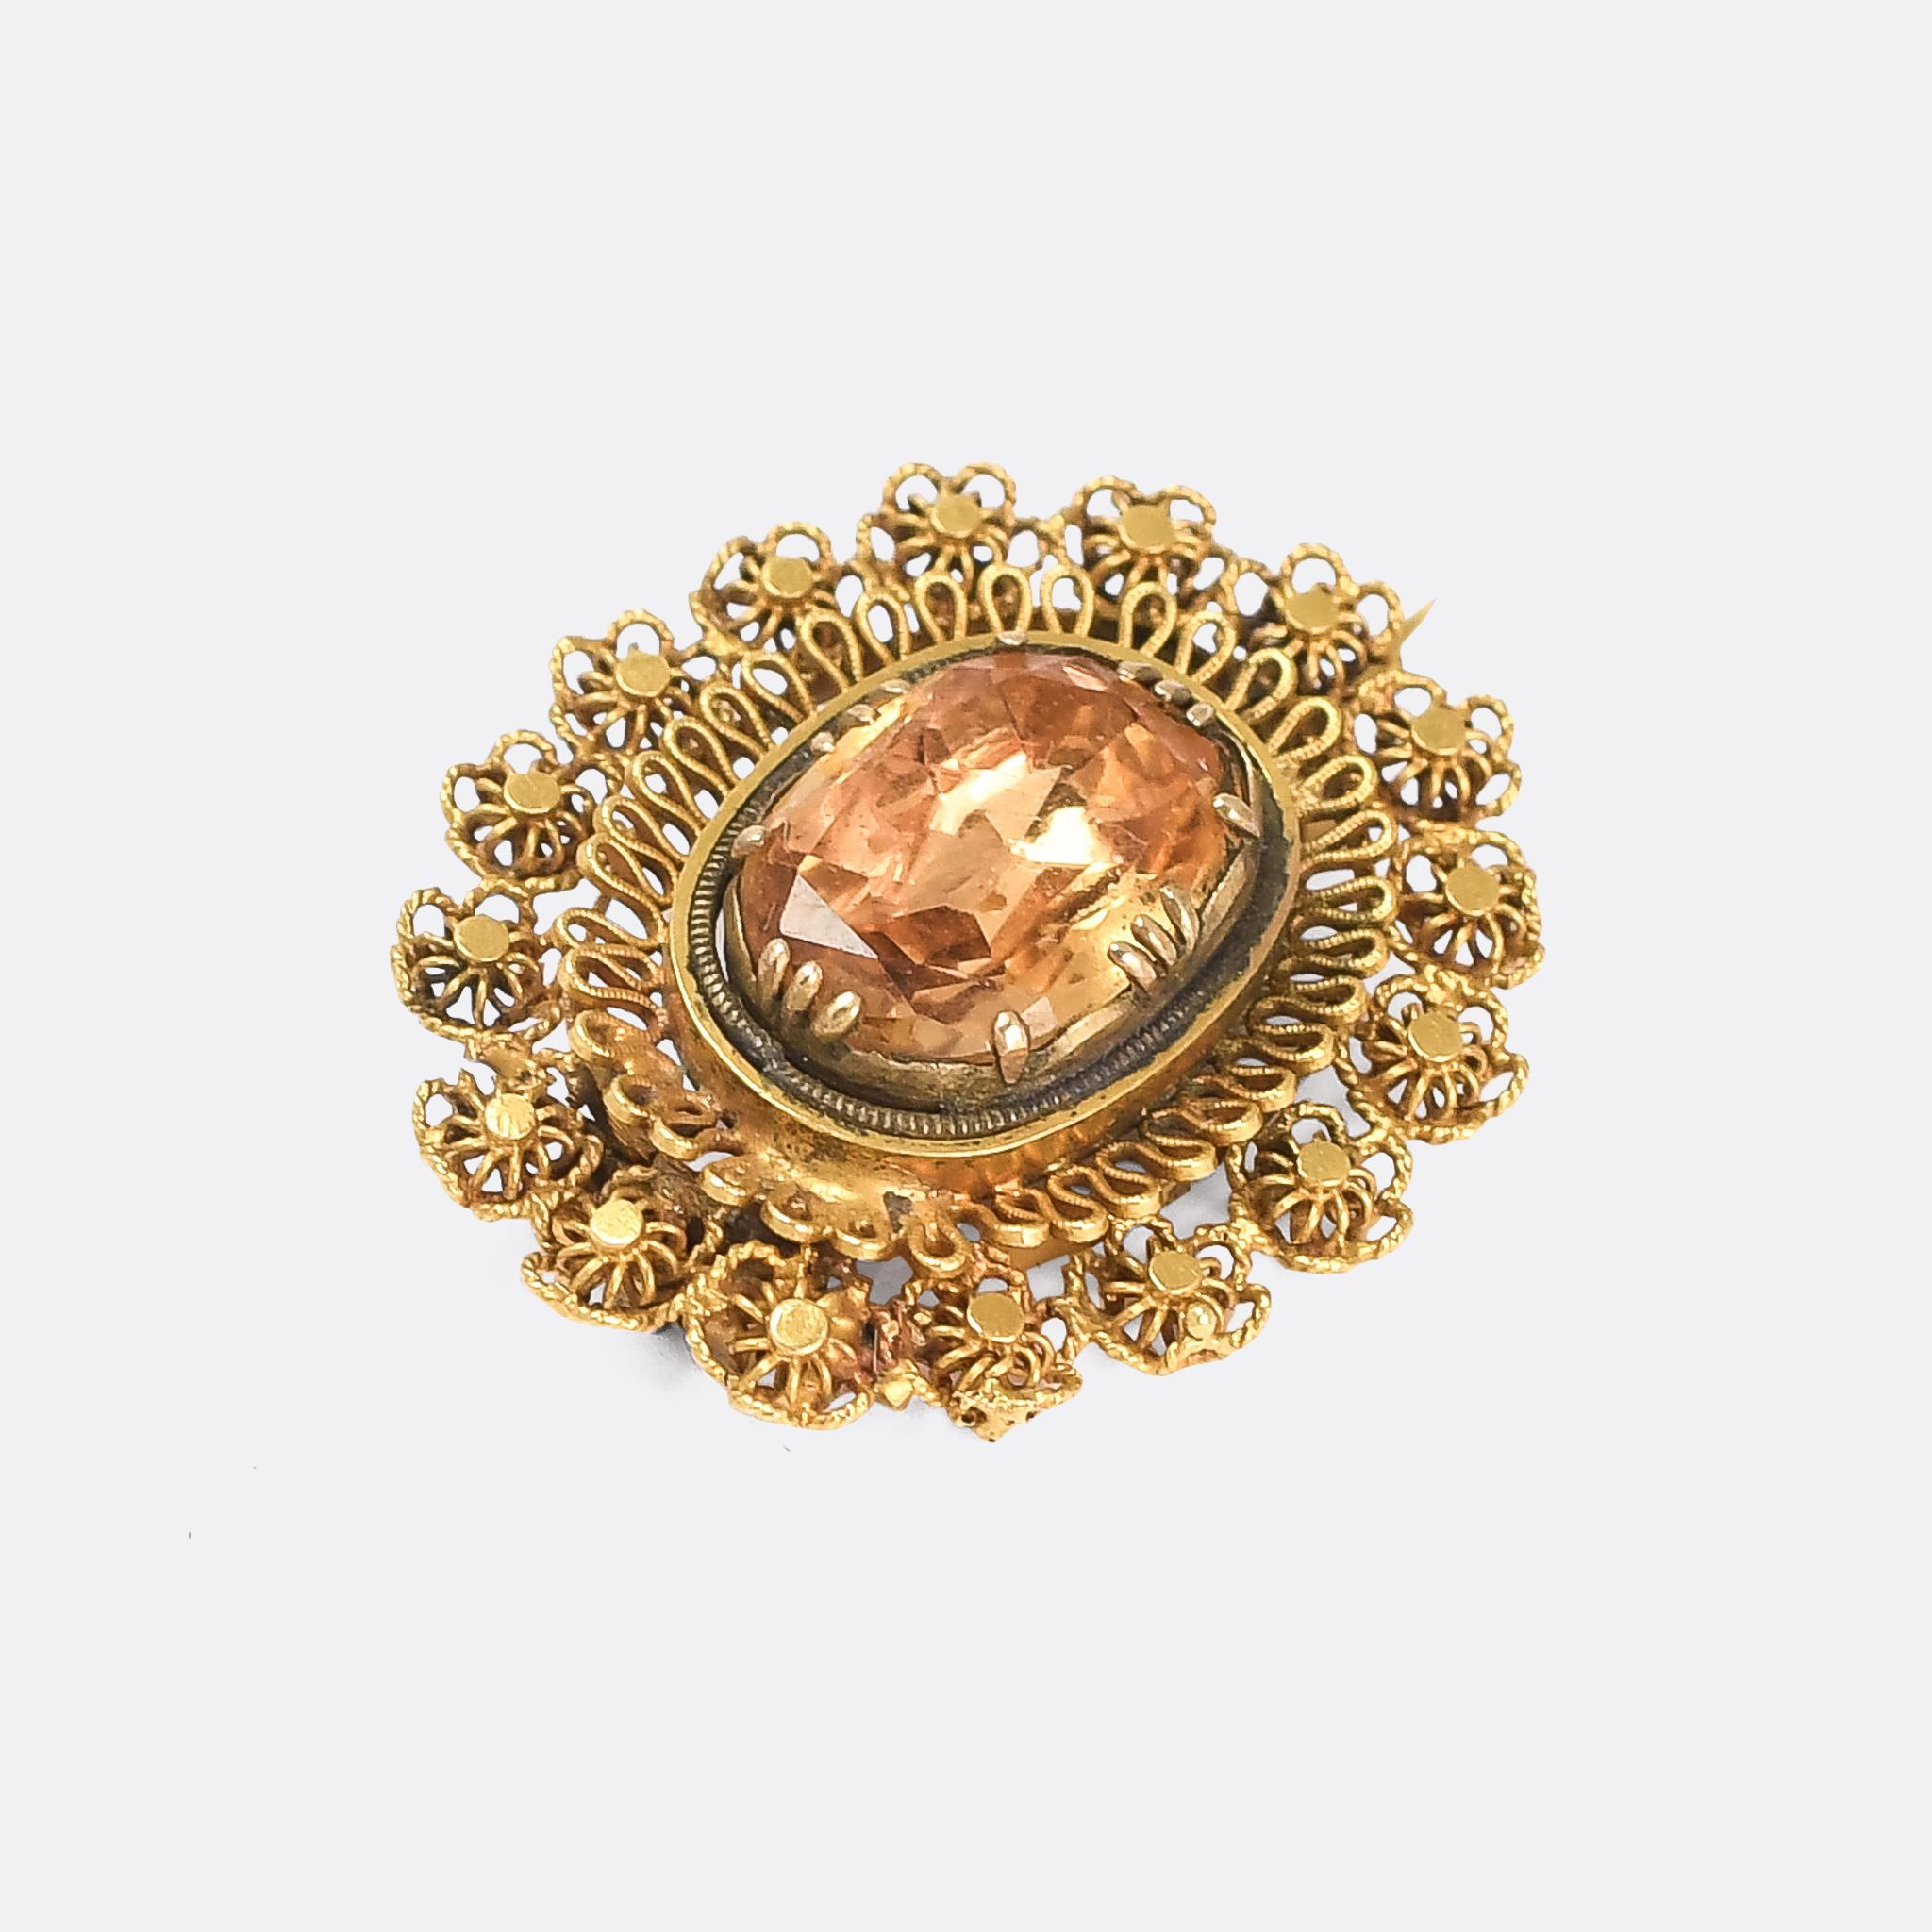 A gorgeous Georgian Regency oval brooch set with a central Imperial Topaz stone. The border is a masterclass in intricate cannetille and wirework - 15 karat gold throughout - and the stone has been set over foil to further enhance it's